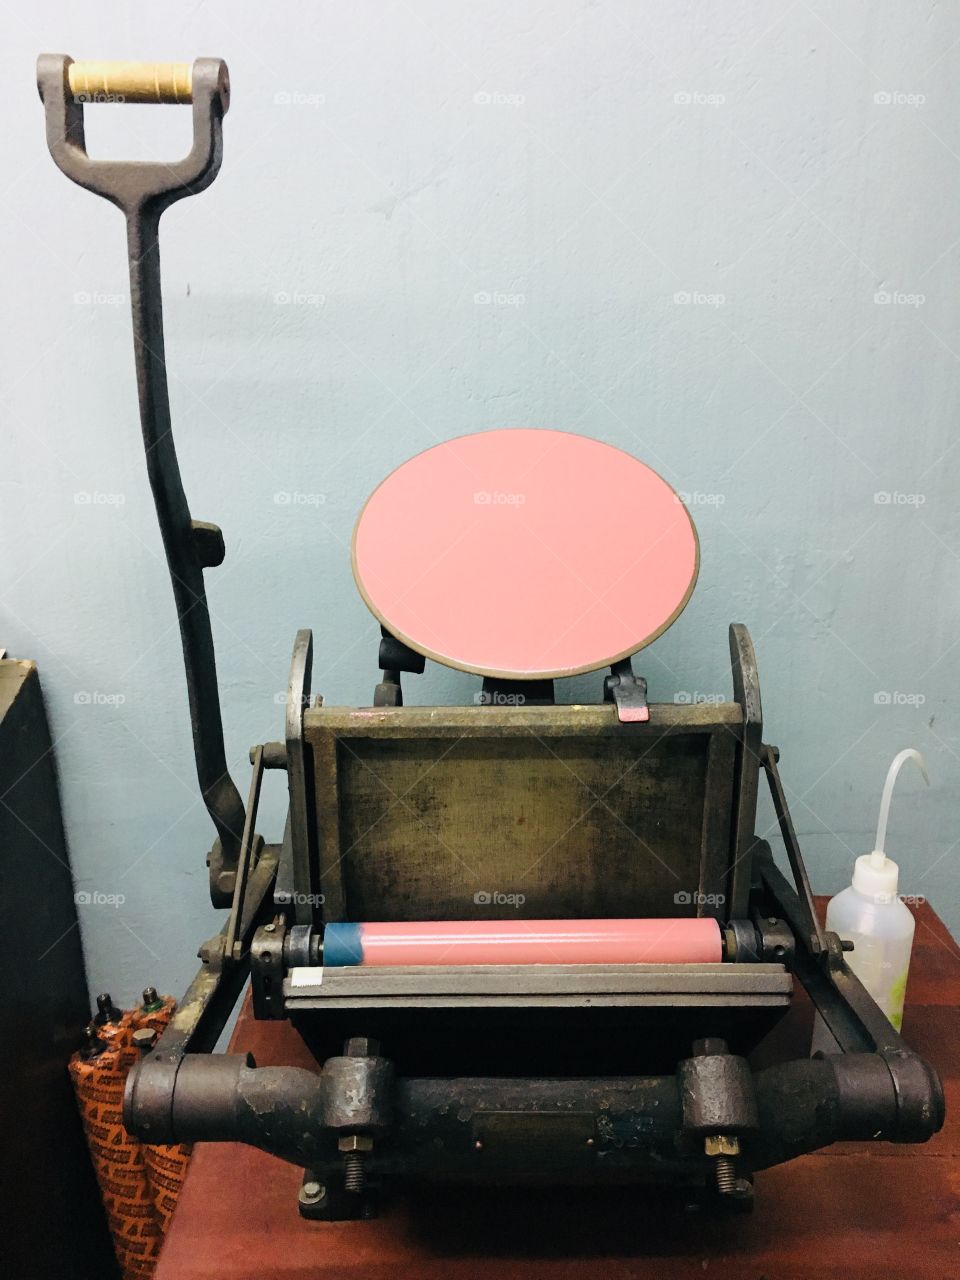 Letterpress printing equipment vintage style machine manual handmade with pink color